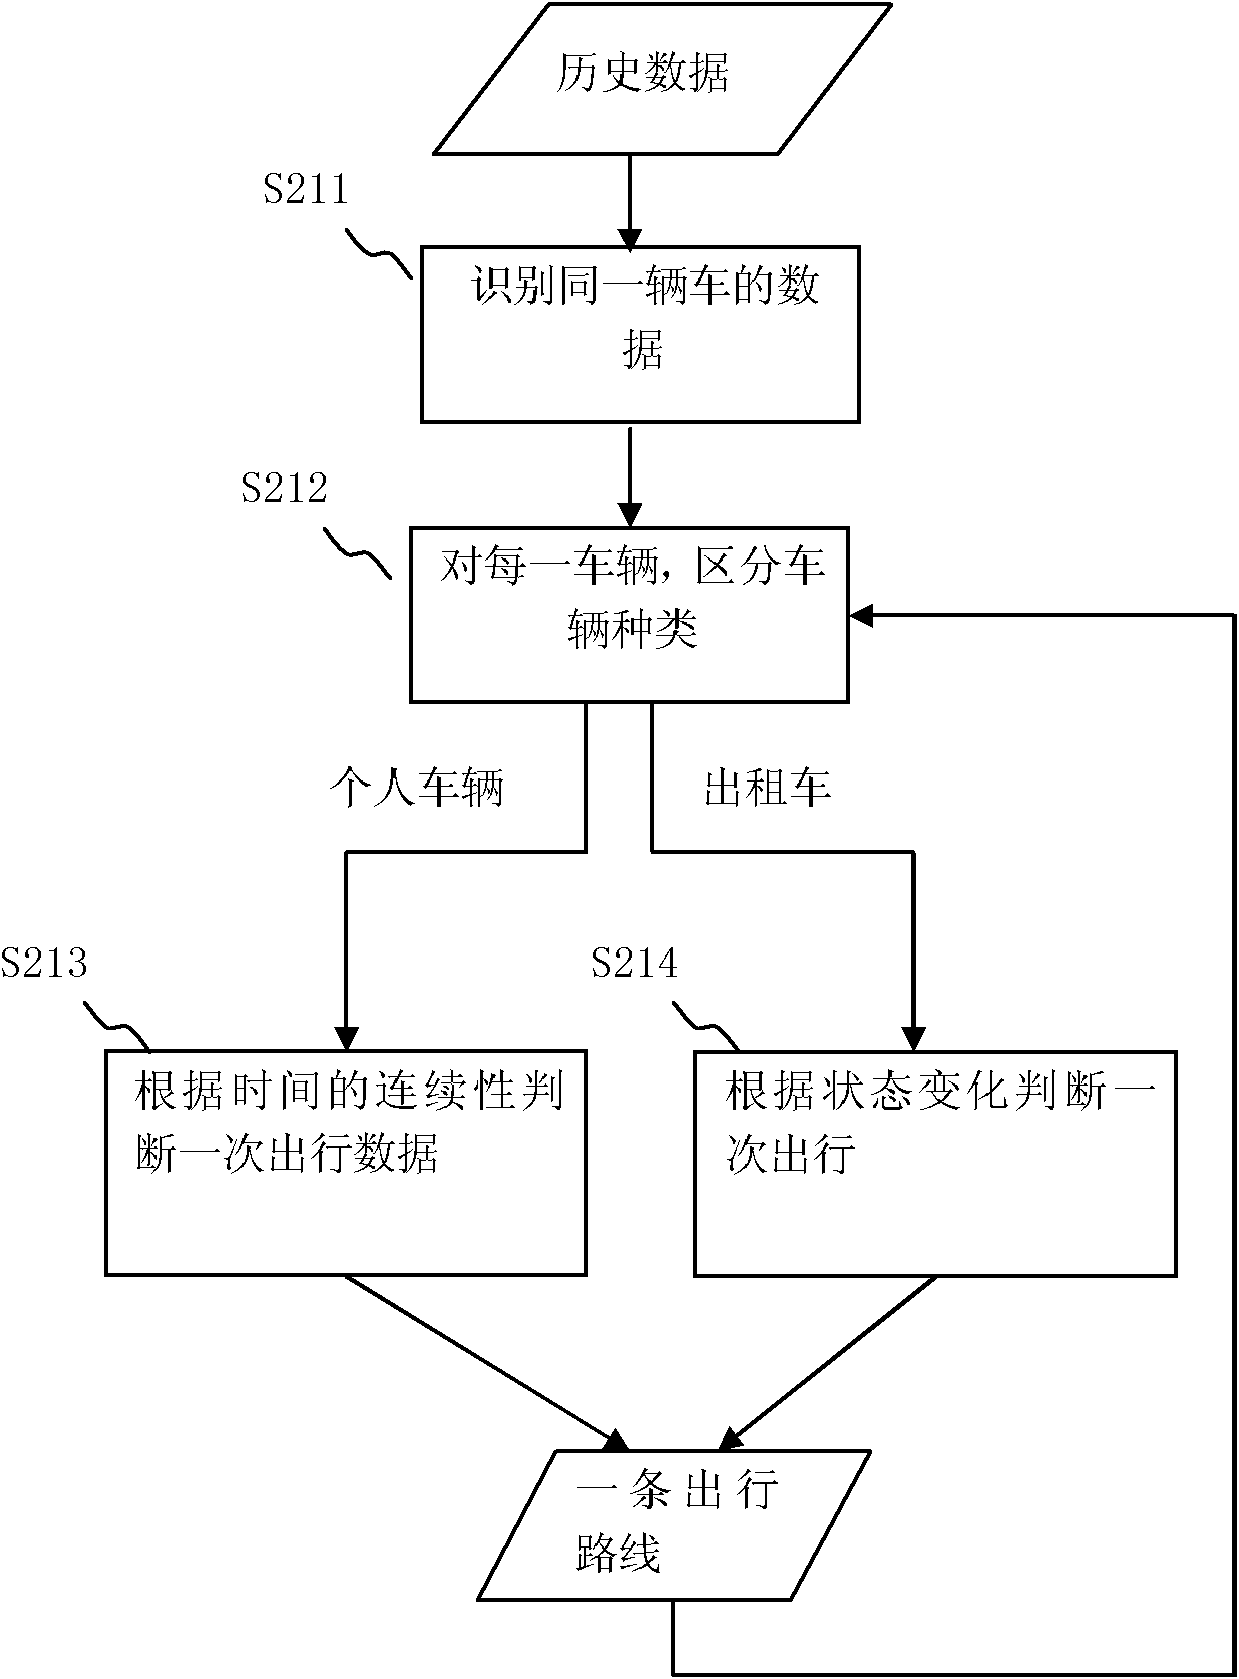 Route searching system and method based on commonly used route